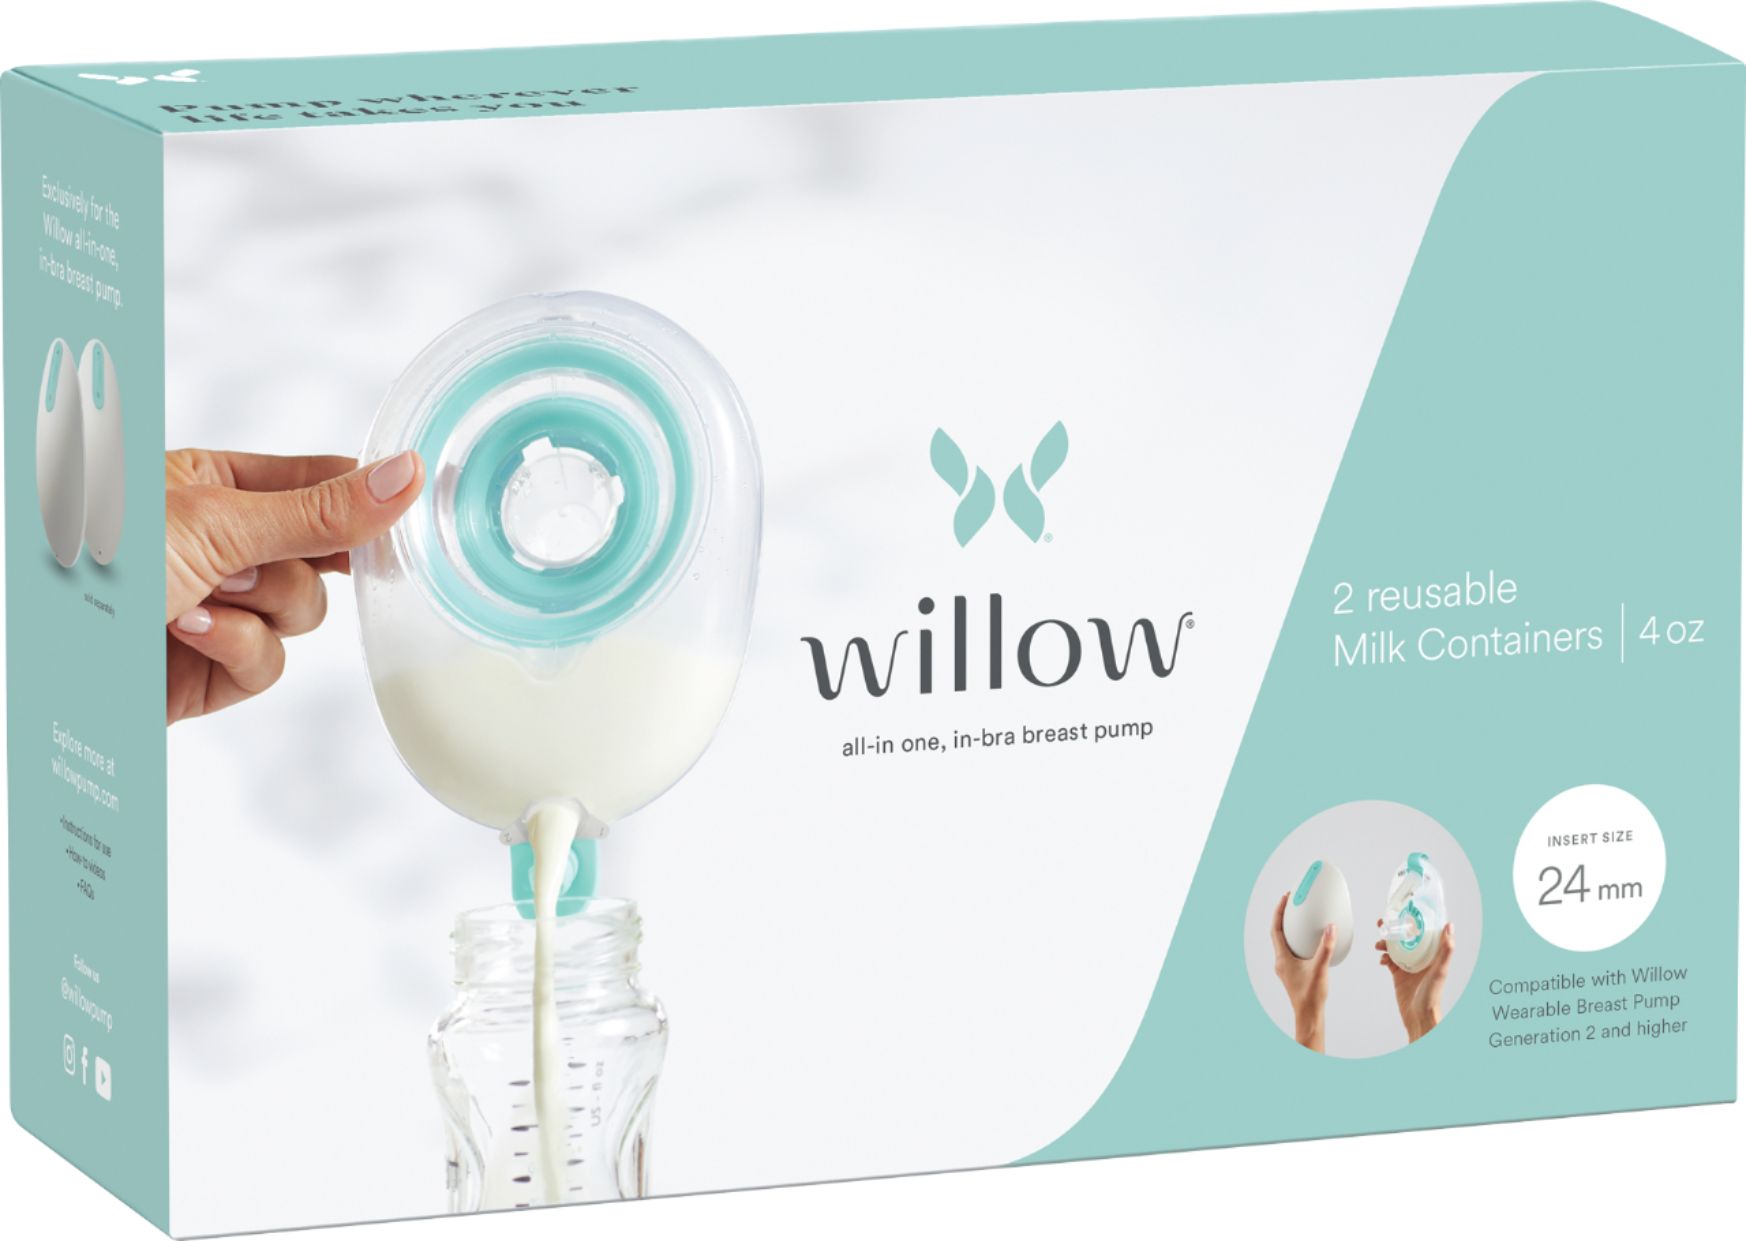 Willow 3.0 Pump Reusable Breast Milk Containers, 2-Pack | Holds up to 4 oz.  per Container | for The Willow Pump for Hands-Free Pumping (Clear, 21mm) 